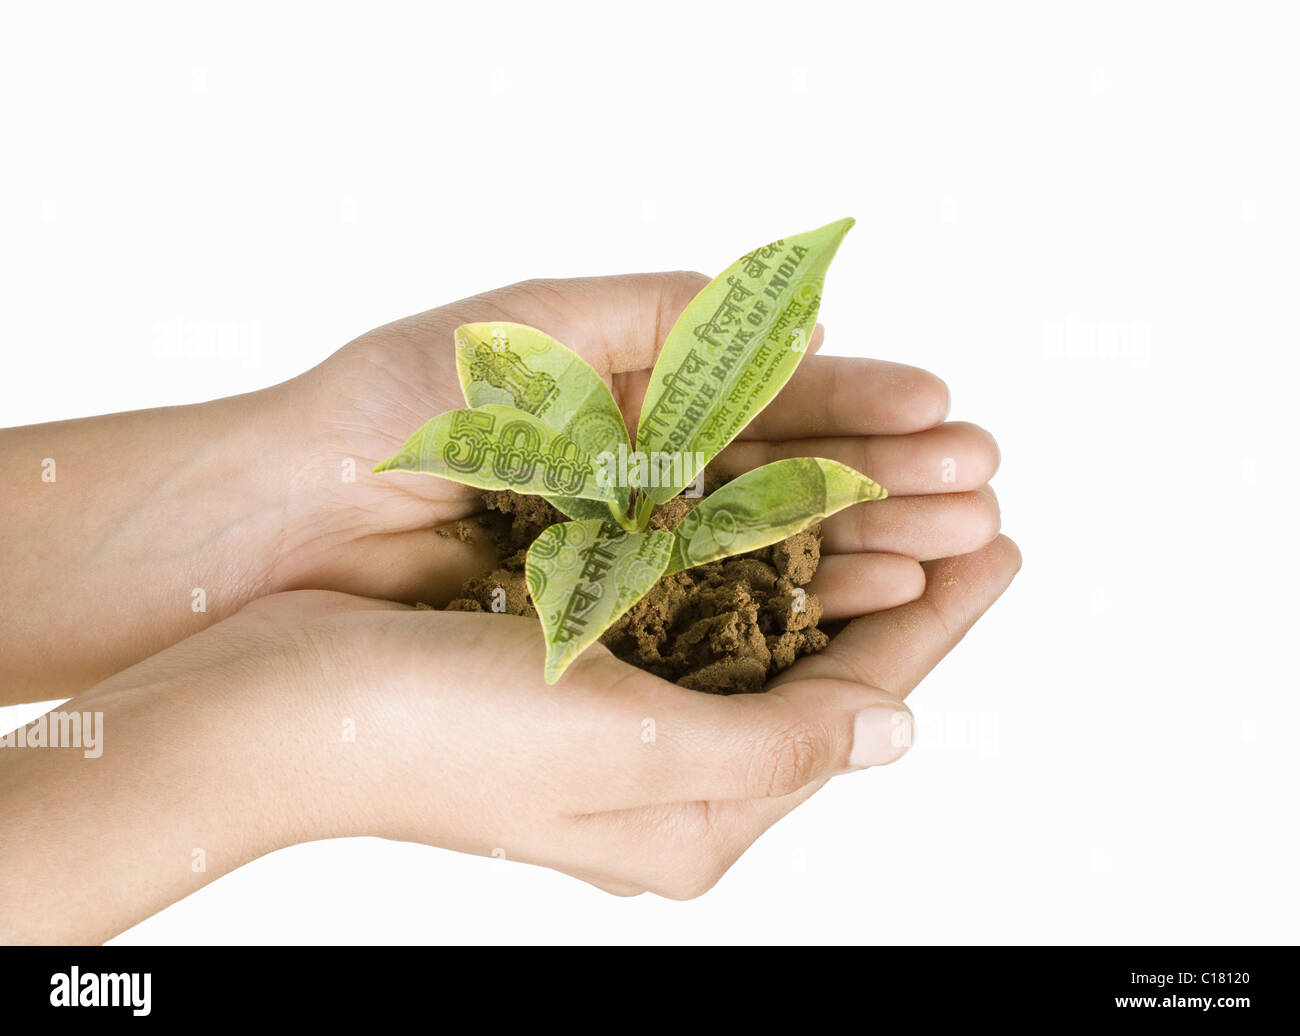 Close-up of a person's hands holding a plant with leaves of Indian currency Stock Photo